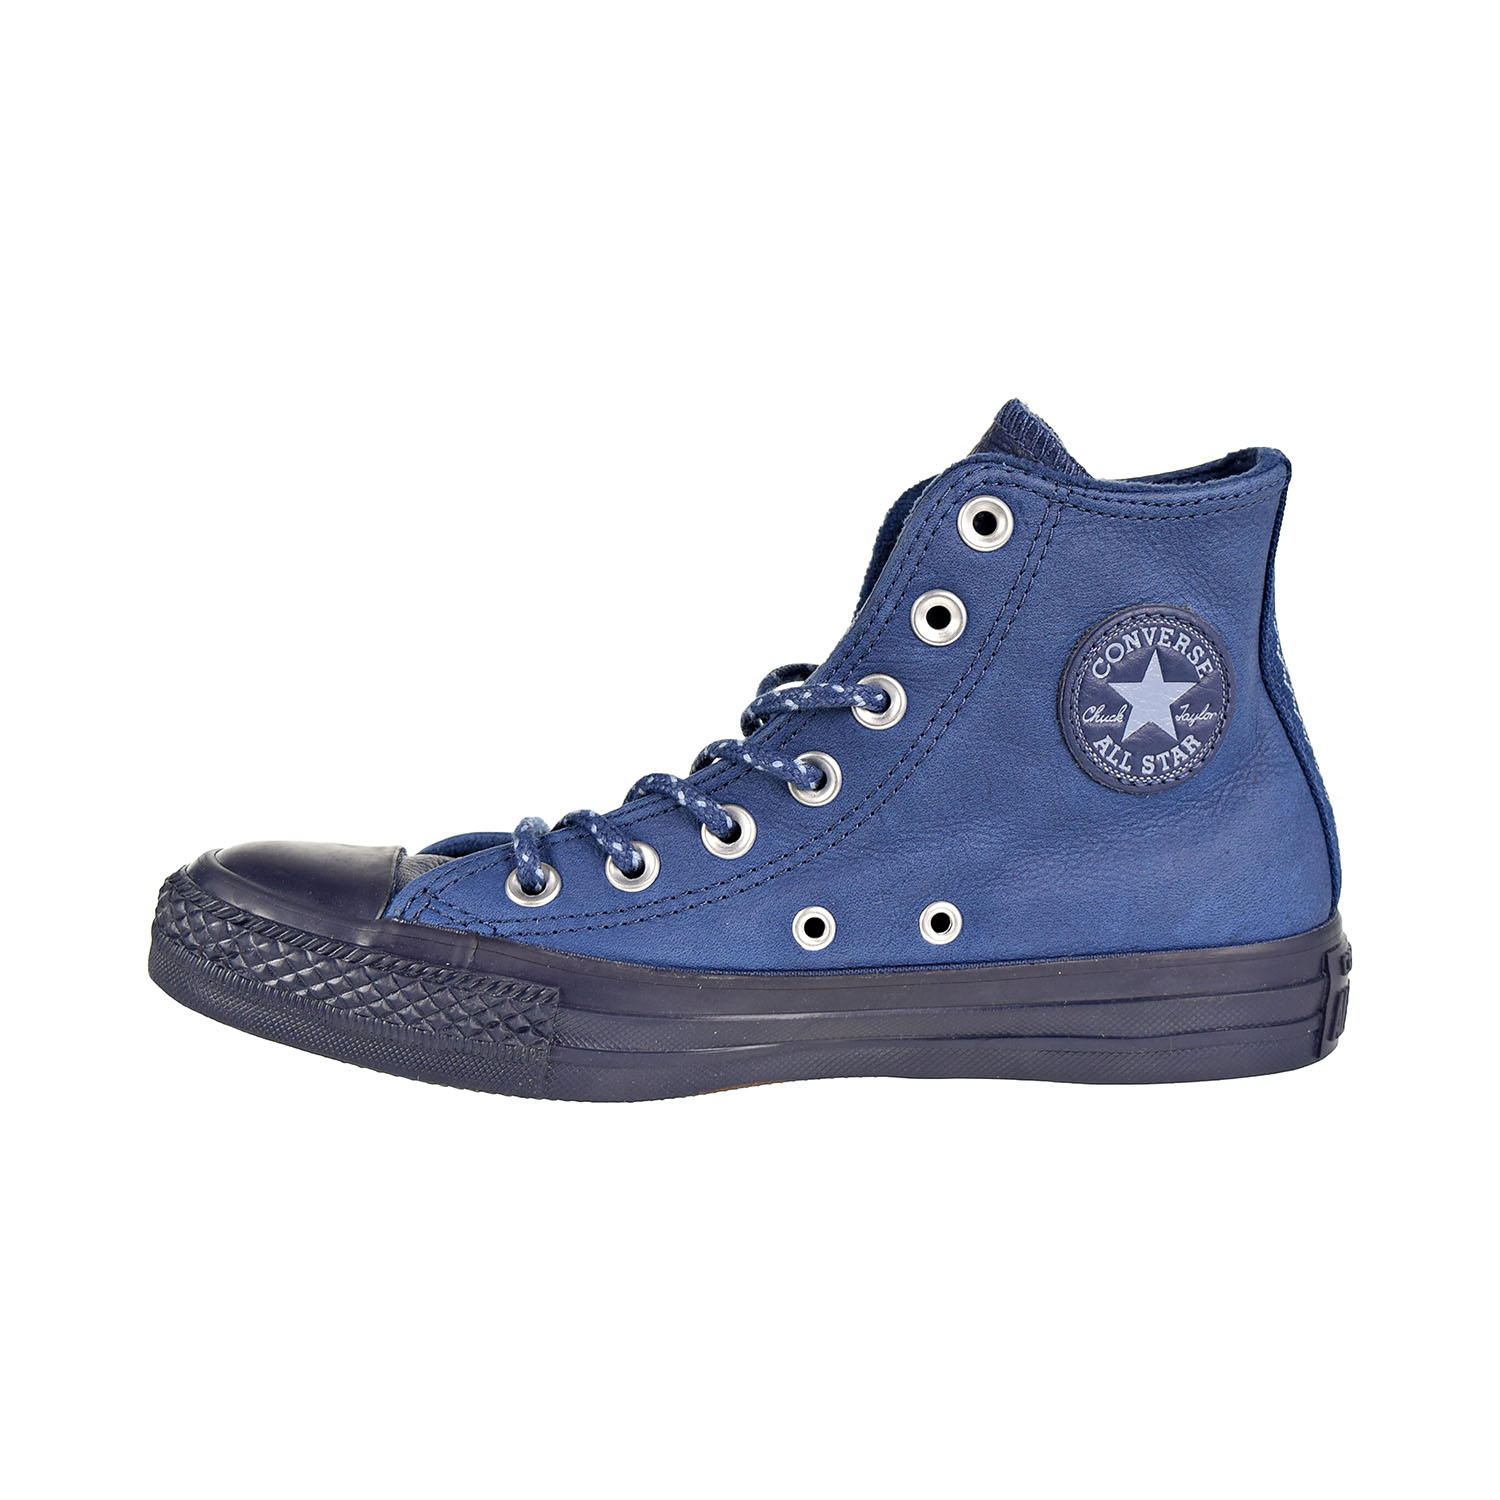 Converse Chuck Taylor All Star Hi Leather Men's Shoes Midnight Navy/Blue  Slate 157515c